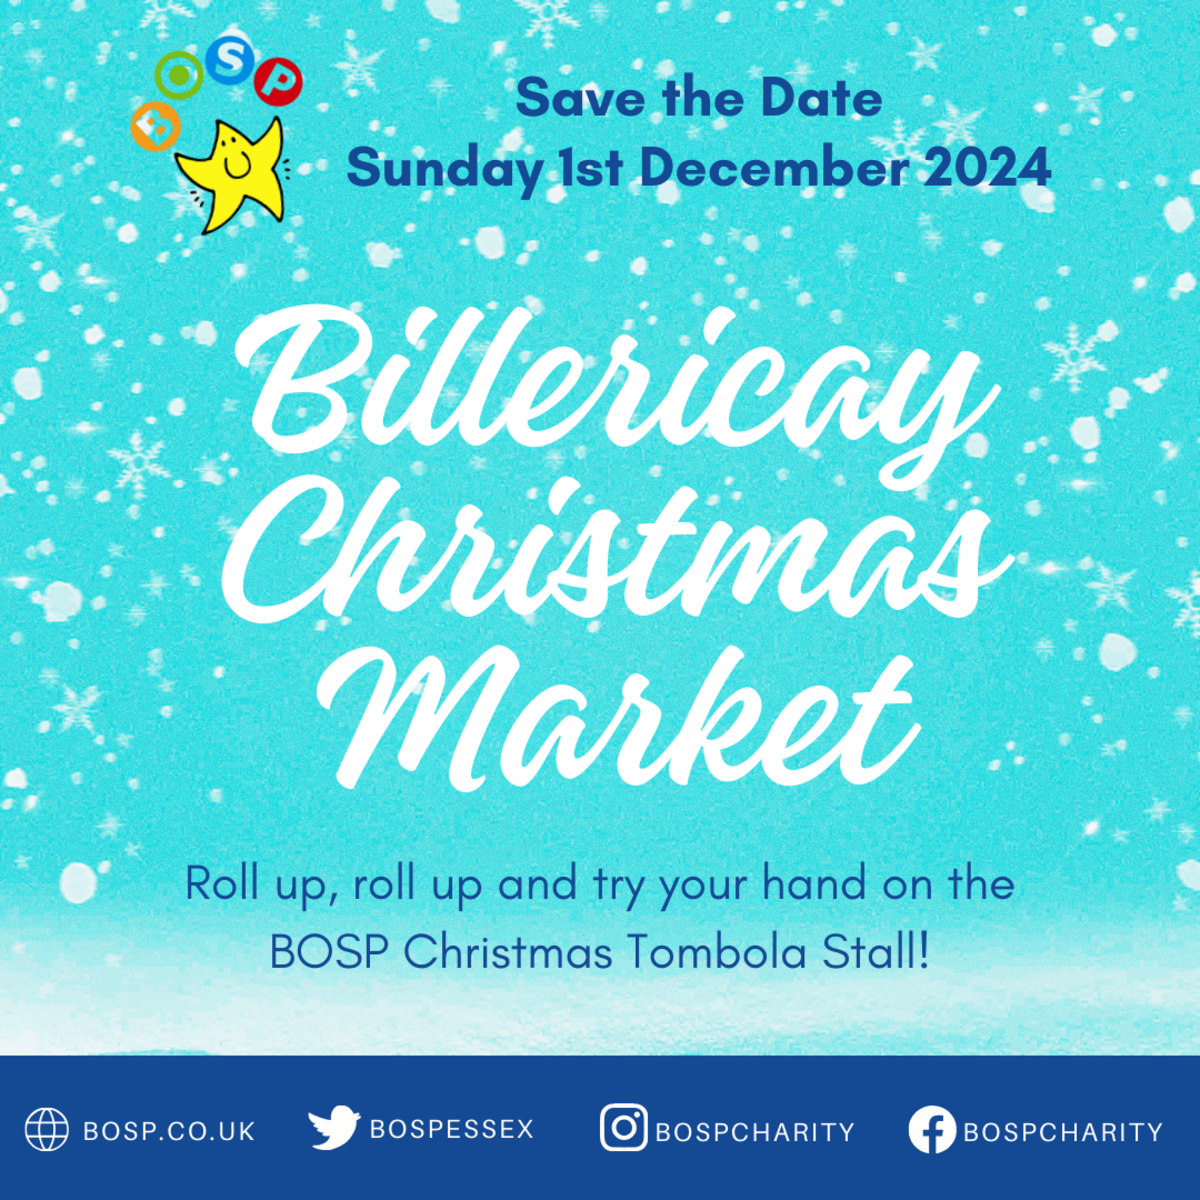 BOSP Brighter Opportunities for Special People  Billericay Christmas Market